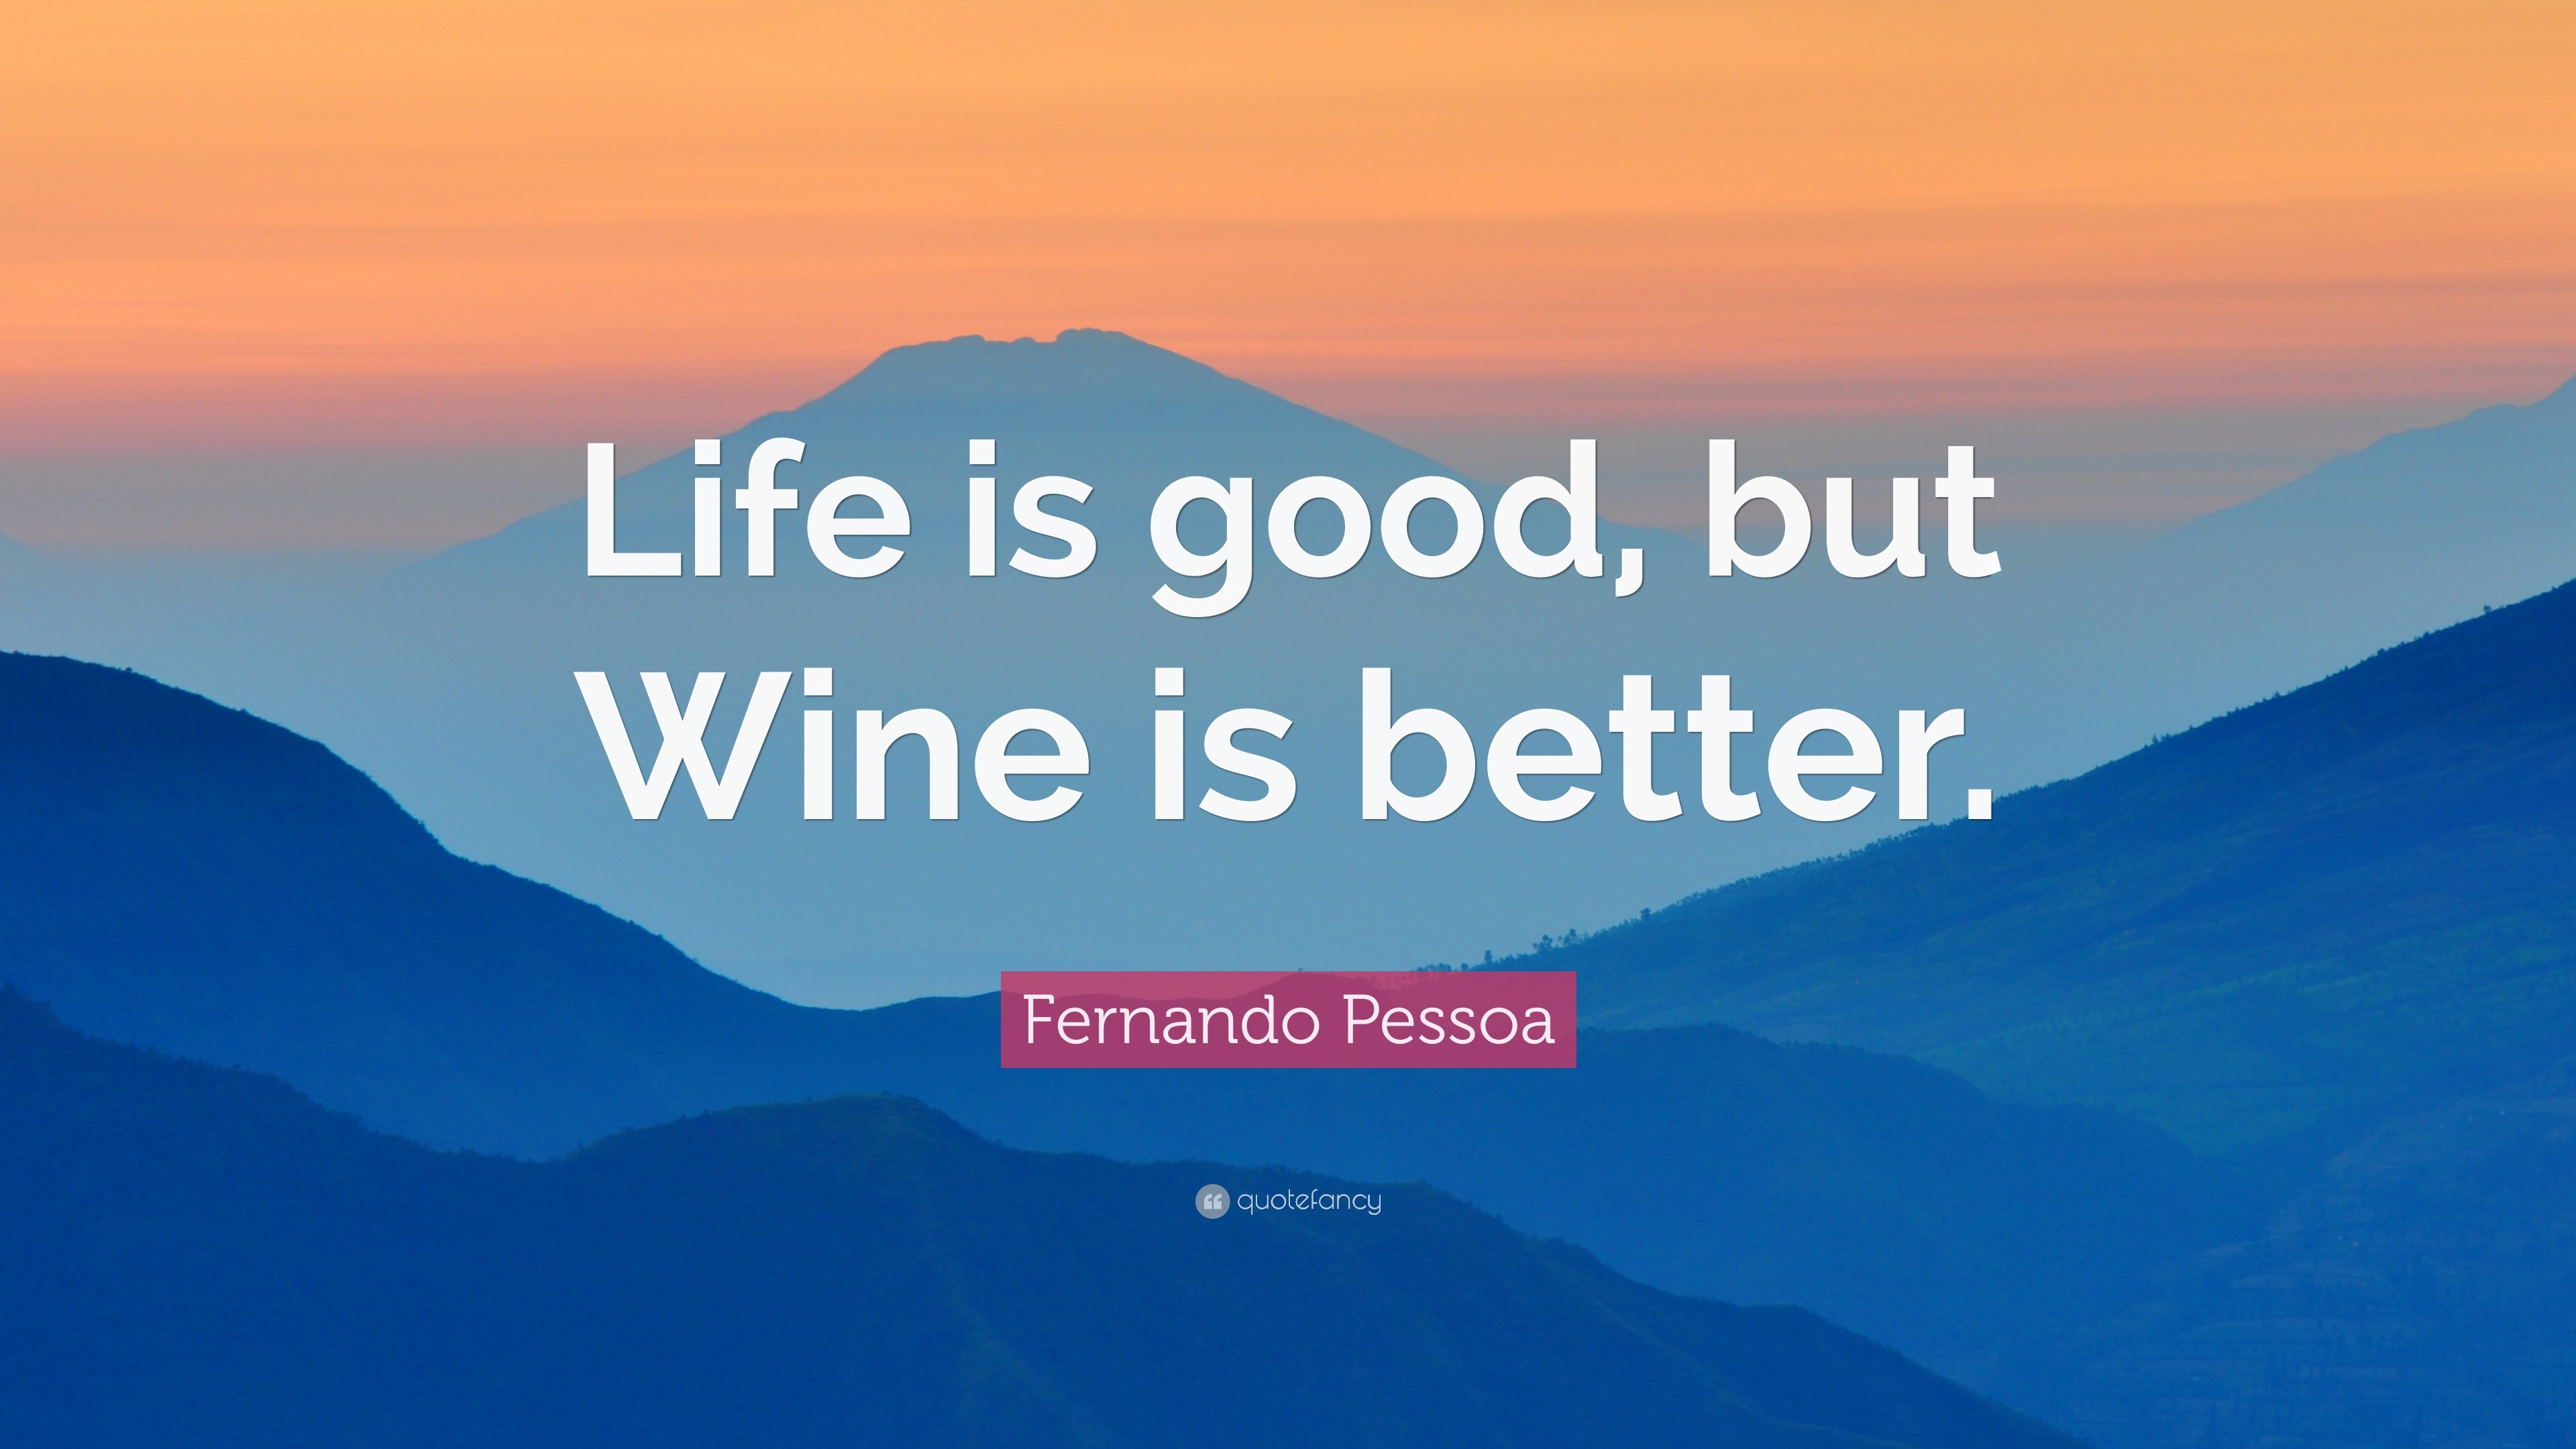 Fernando Pessoa Quote “Life is good but Wine is better ”